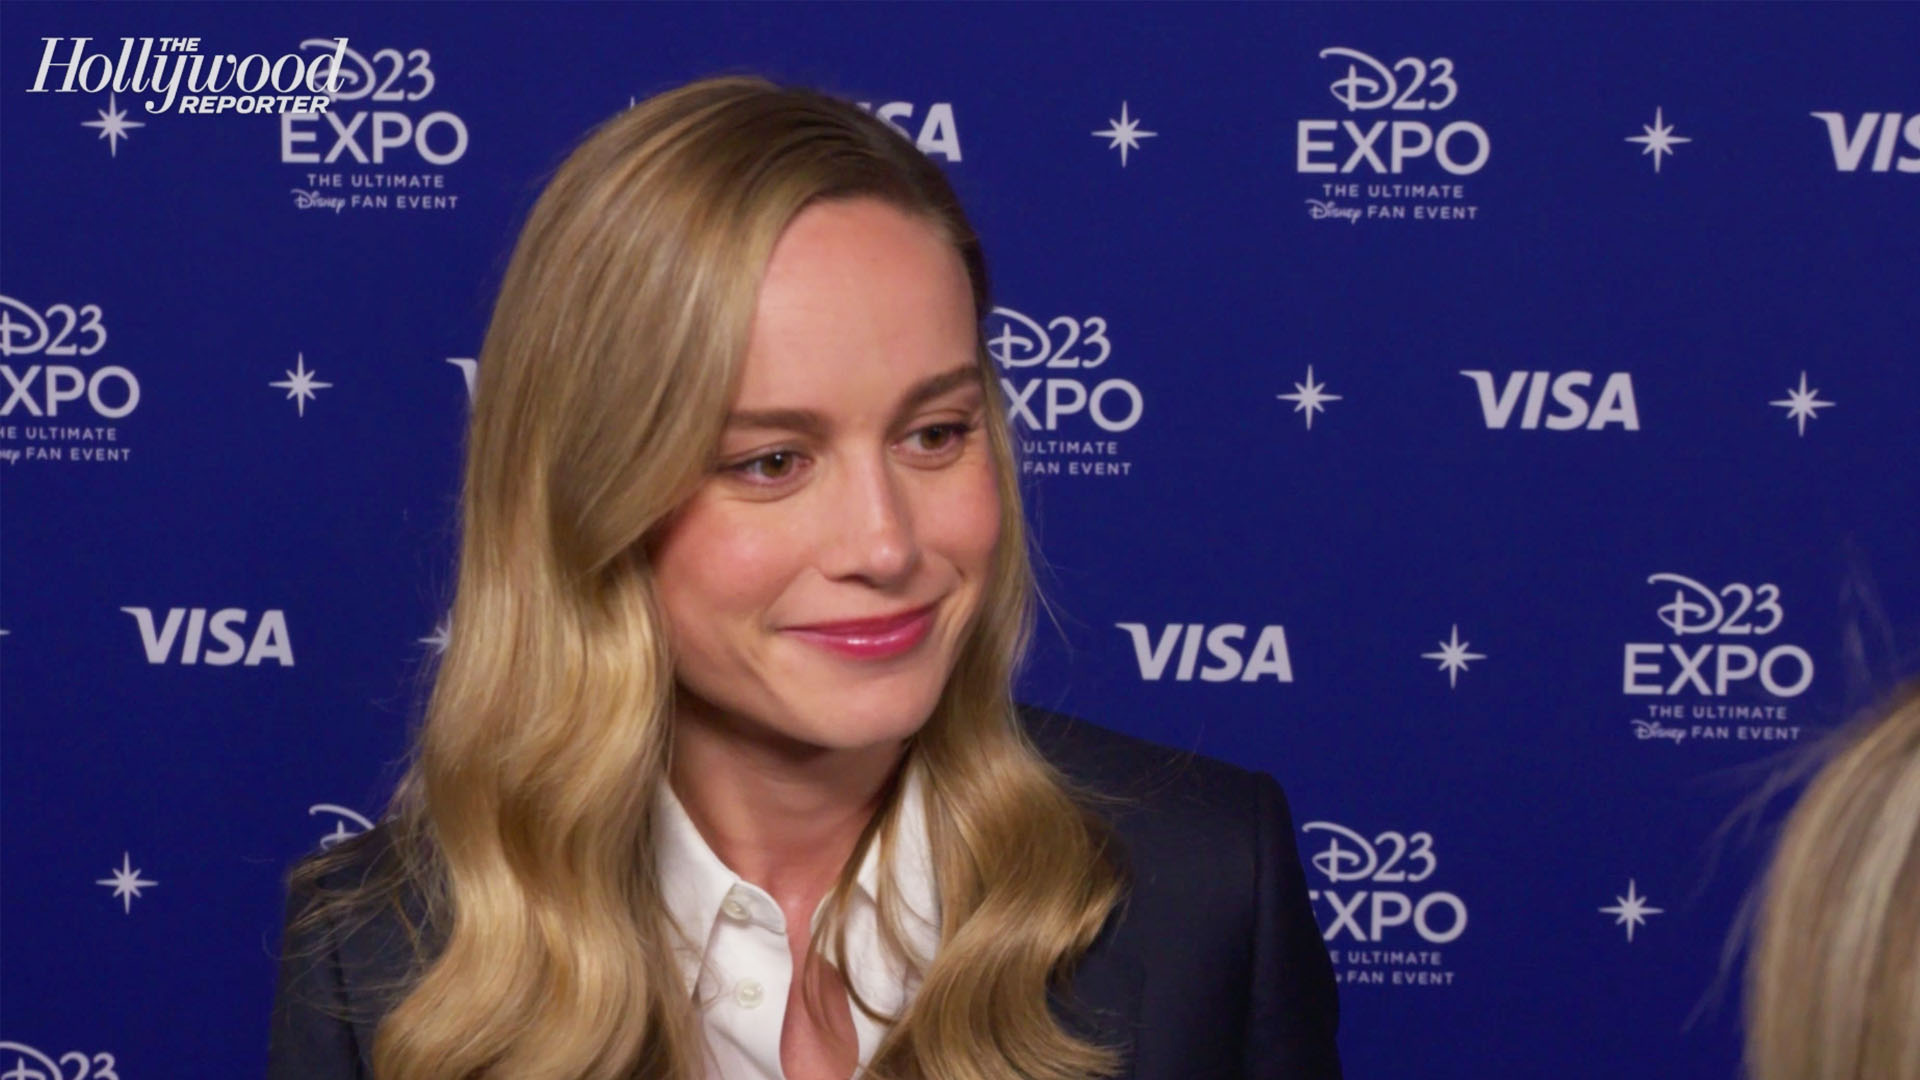 Brie Larson at the D23 expo